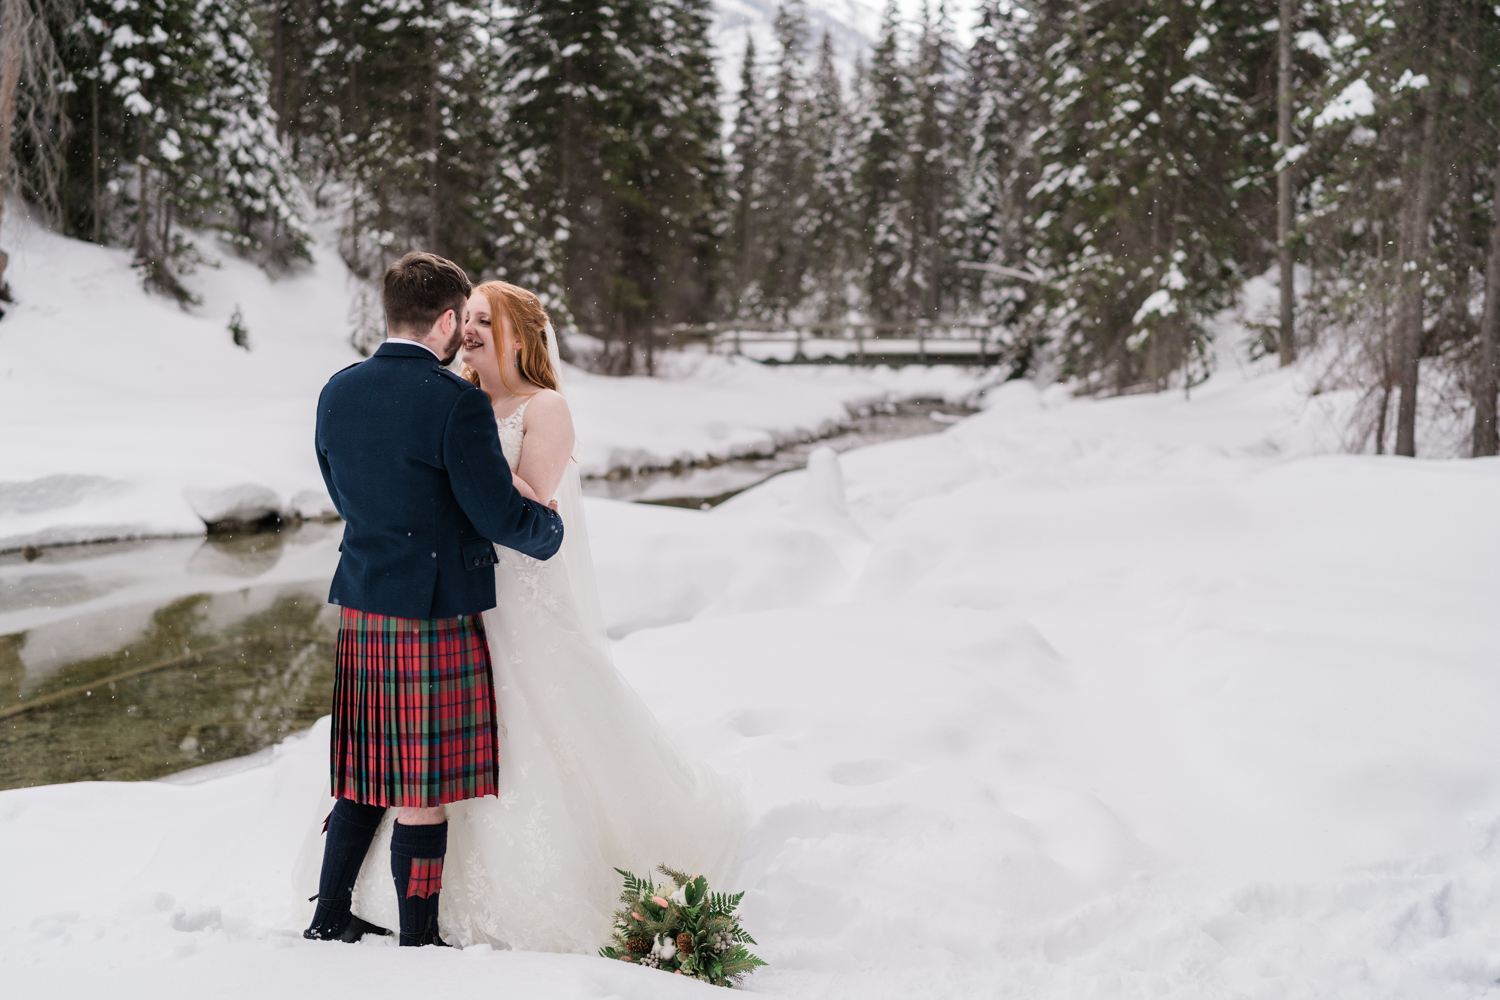 bride and groom face each other while the snow falls lightly with a snowy forest and bridge in the background